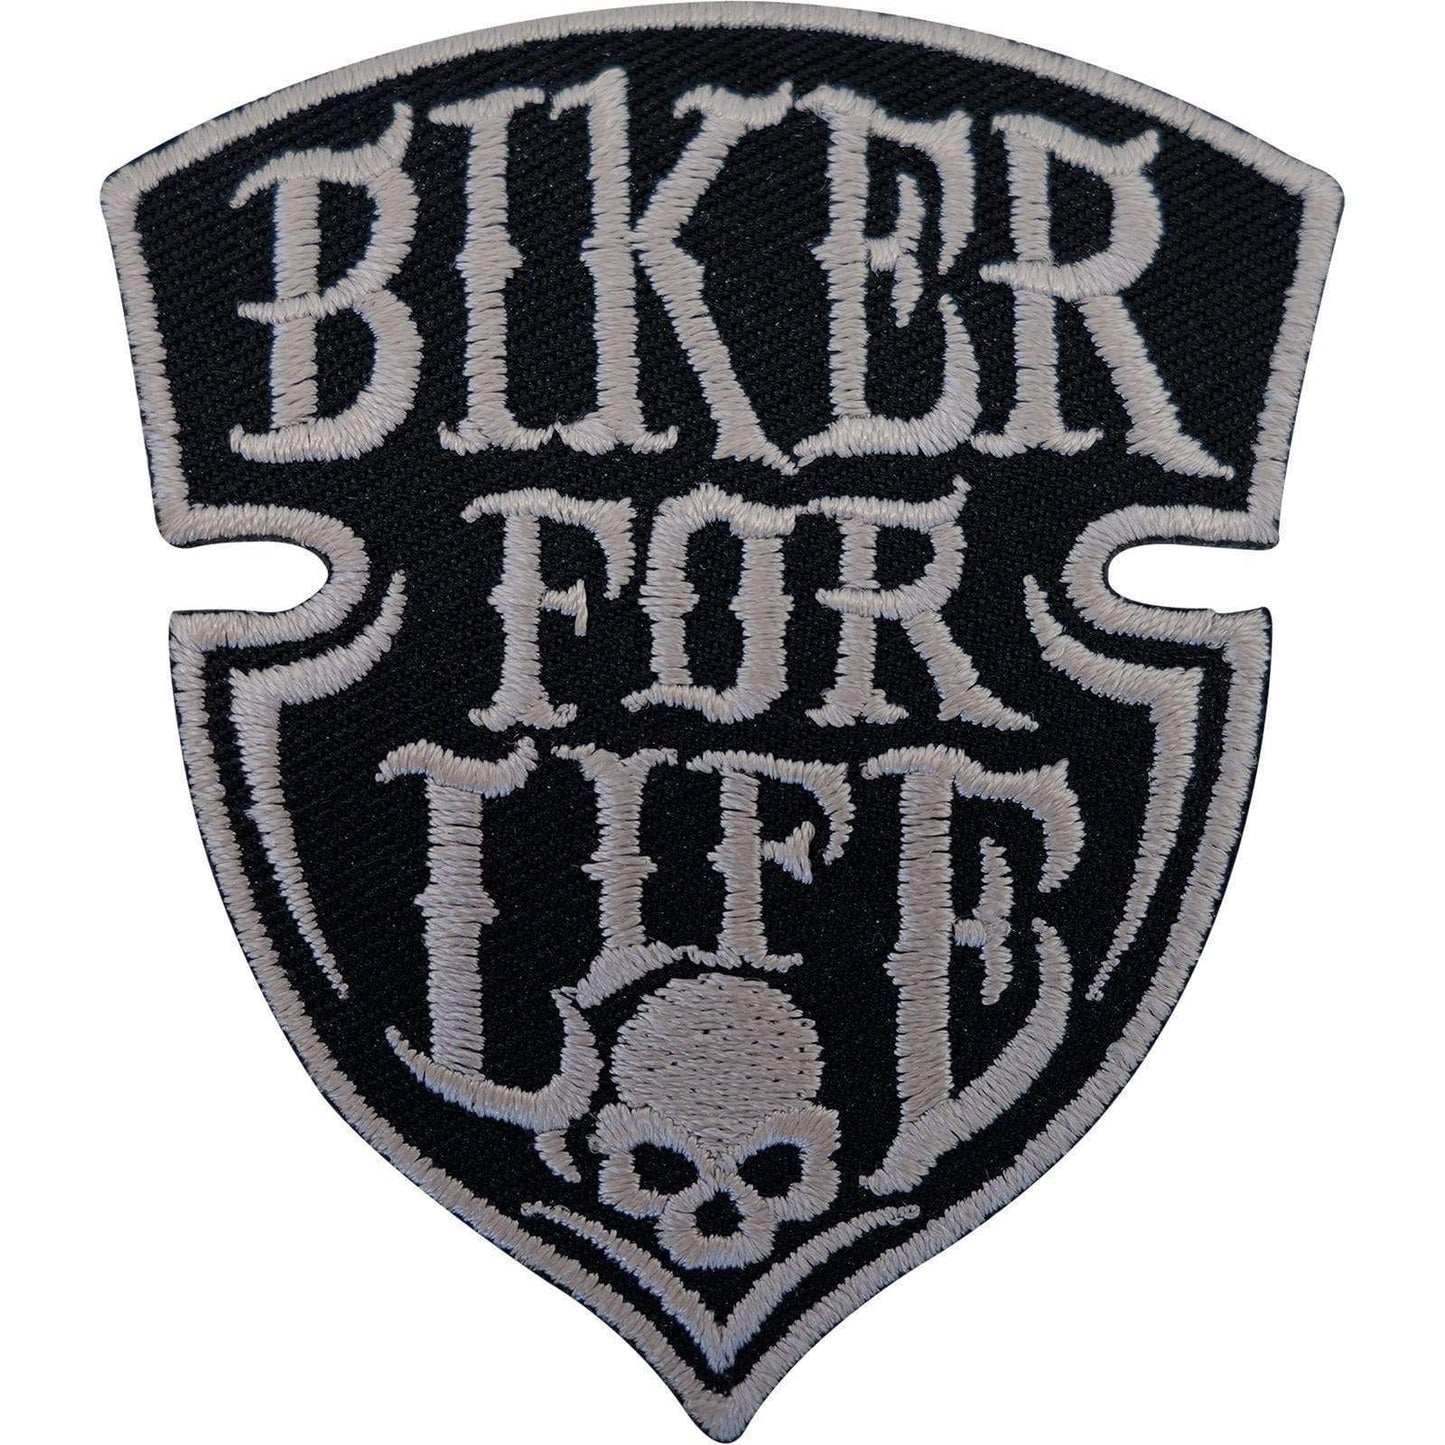 Biker For Life Patch Iron Sew On Embroidered Badge Motorbike Motorcycle Chopper